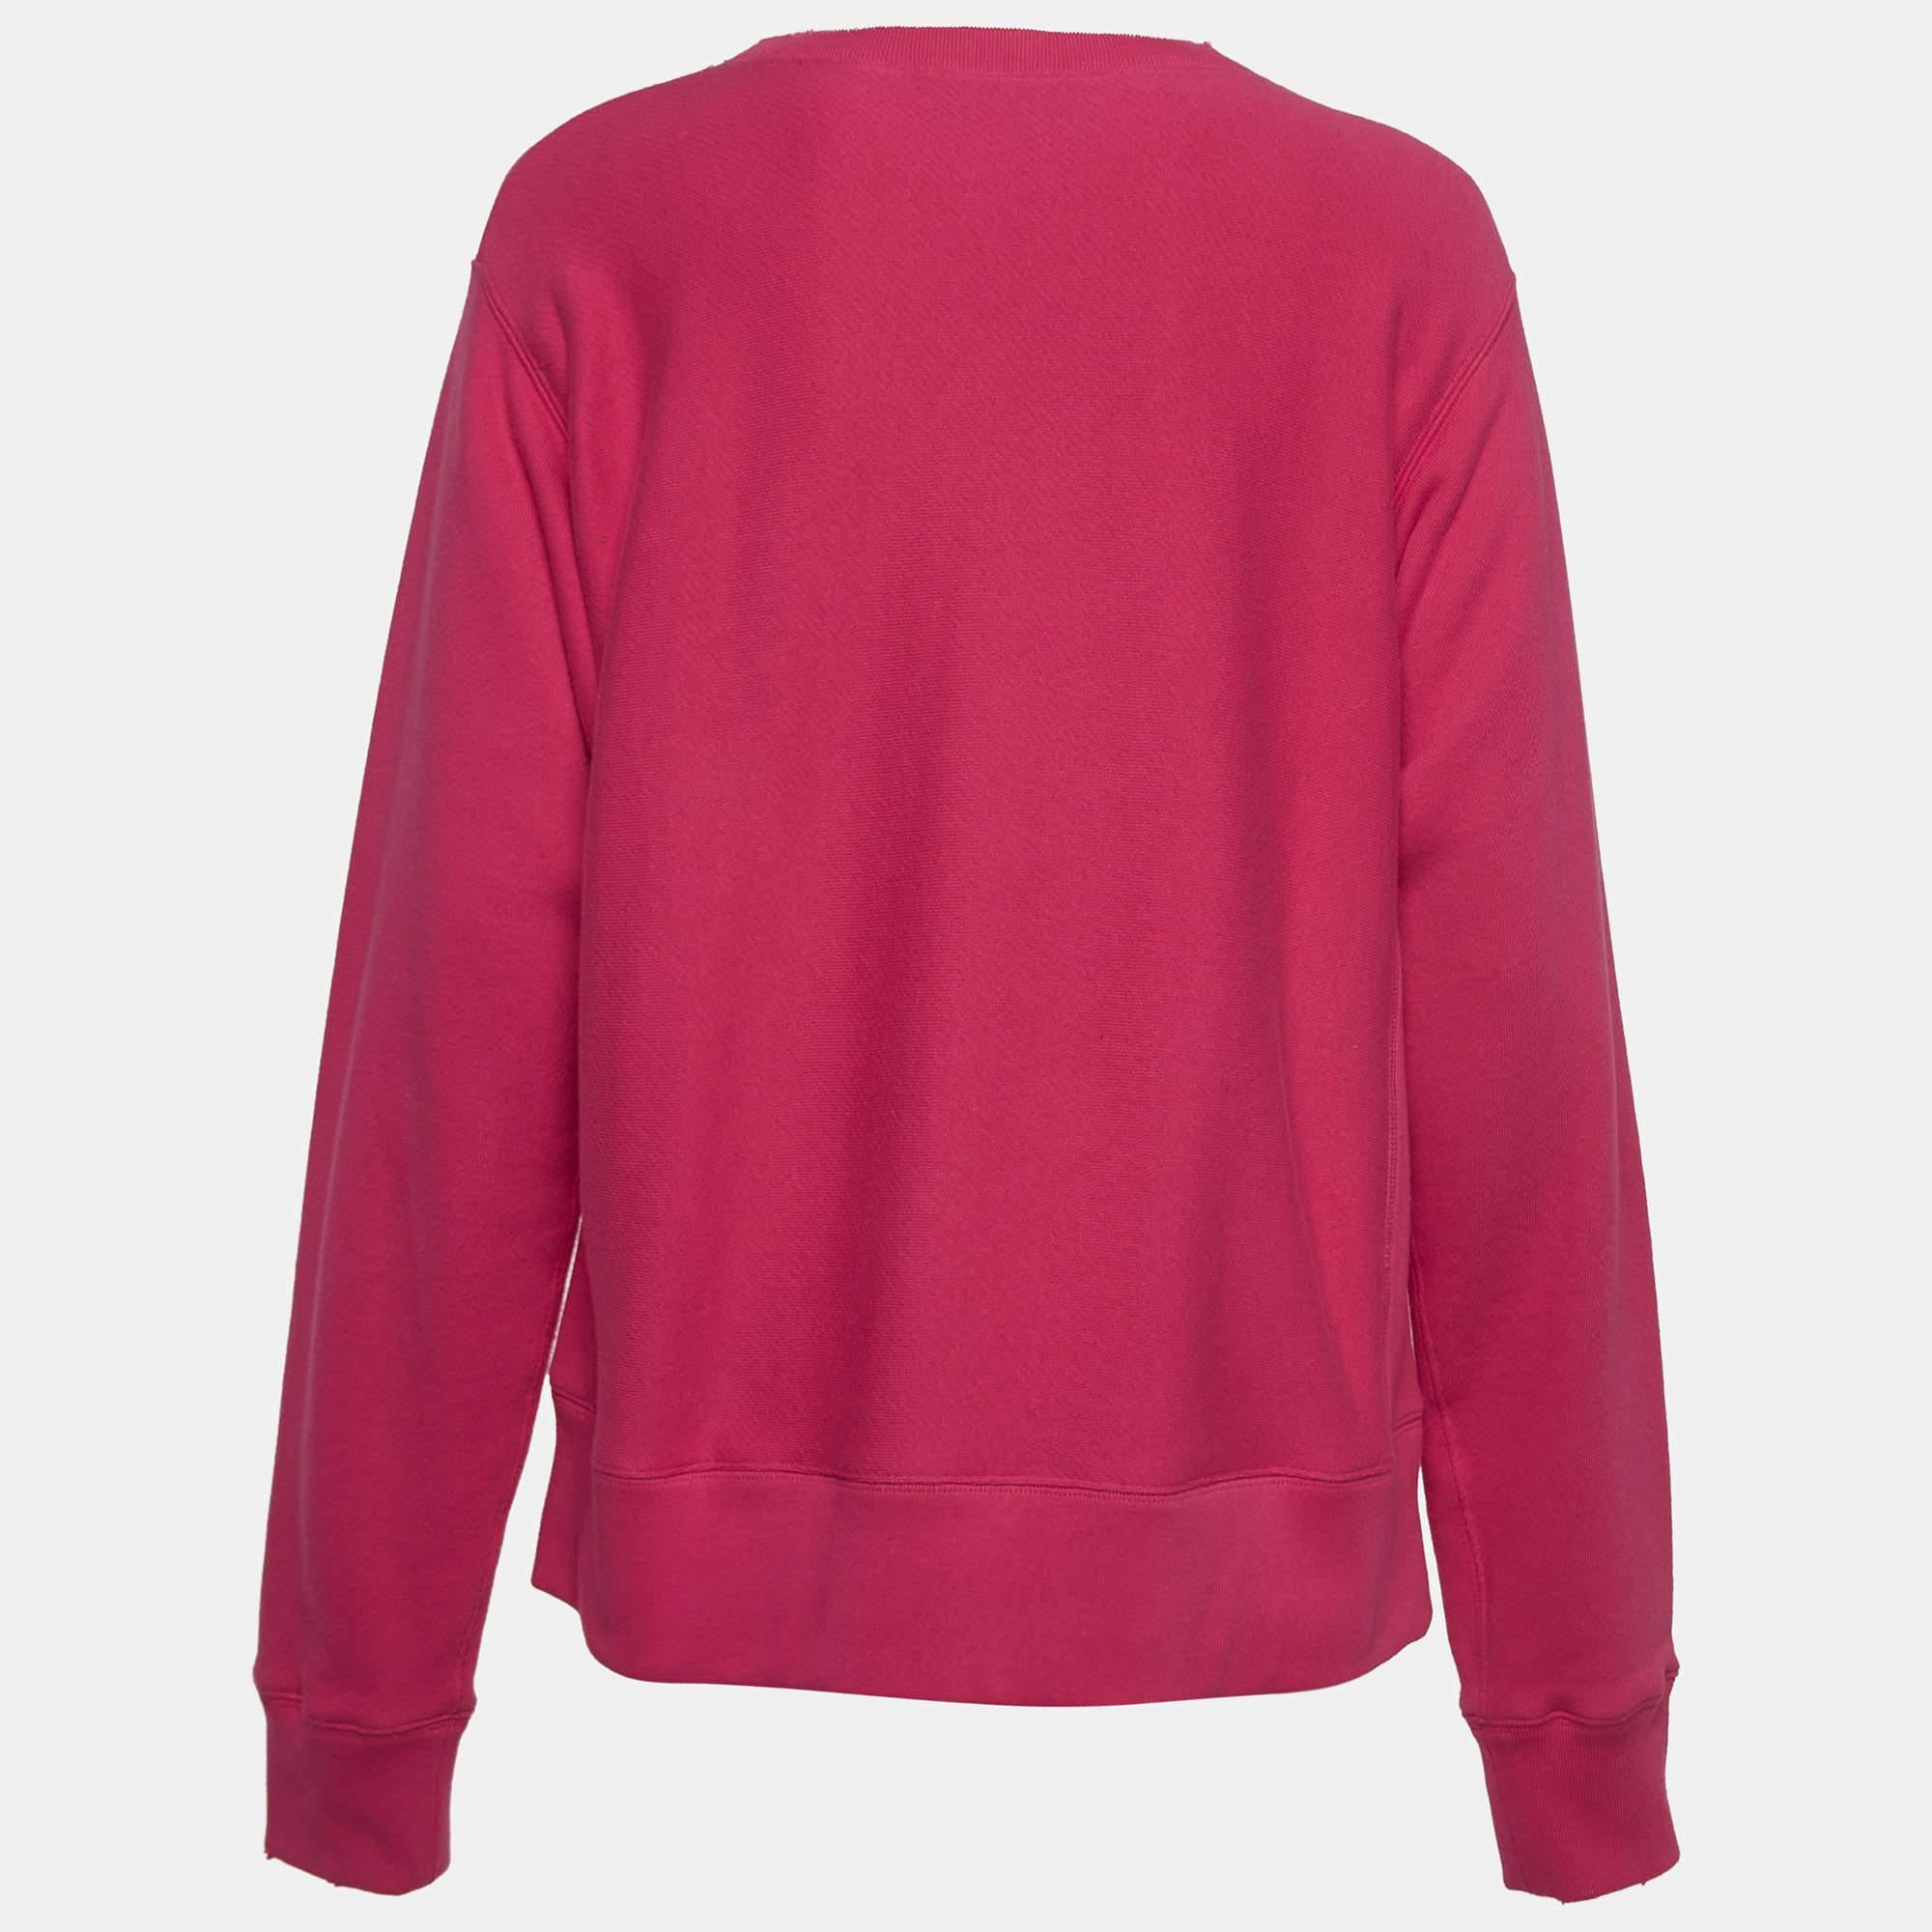 This sweatshirt from Gucci will help you achieve a smart-casual style like no other. It has been creatively tailored from quality fabric and displays a lovely shade.

